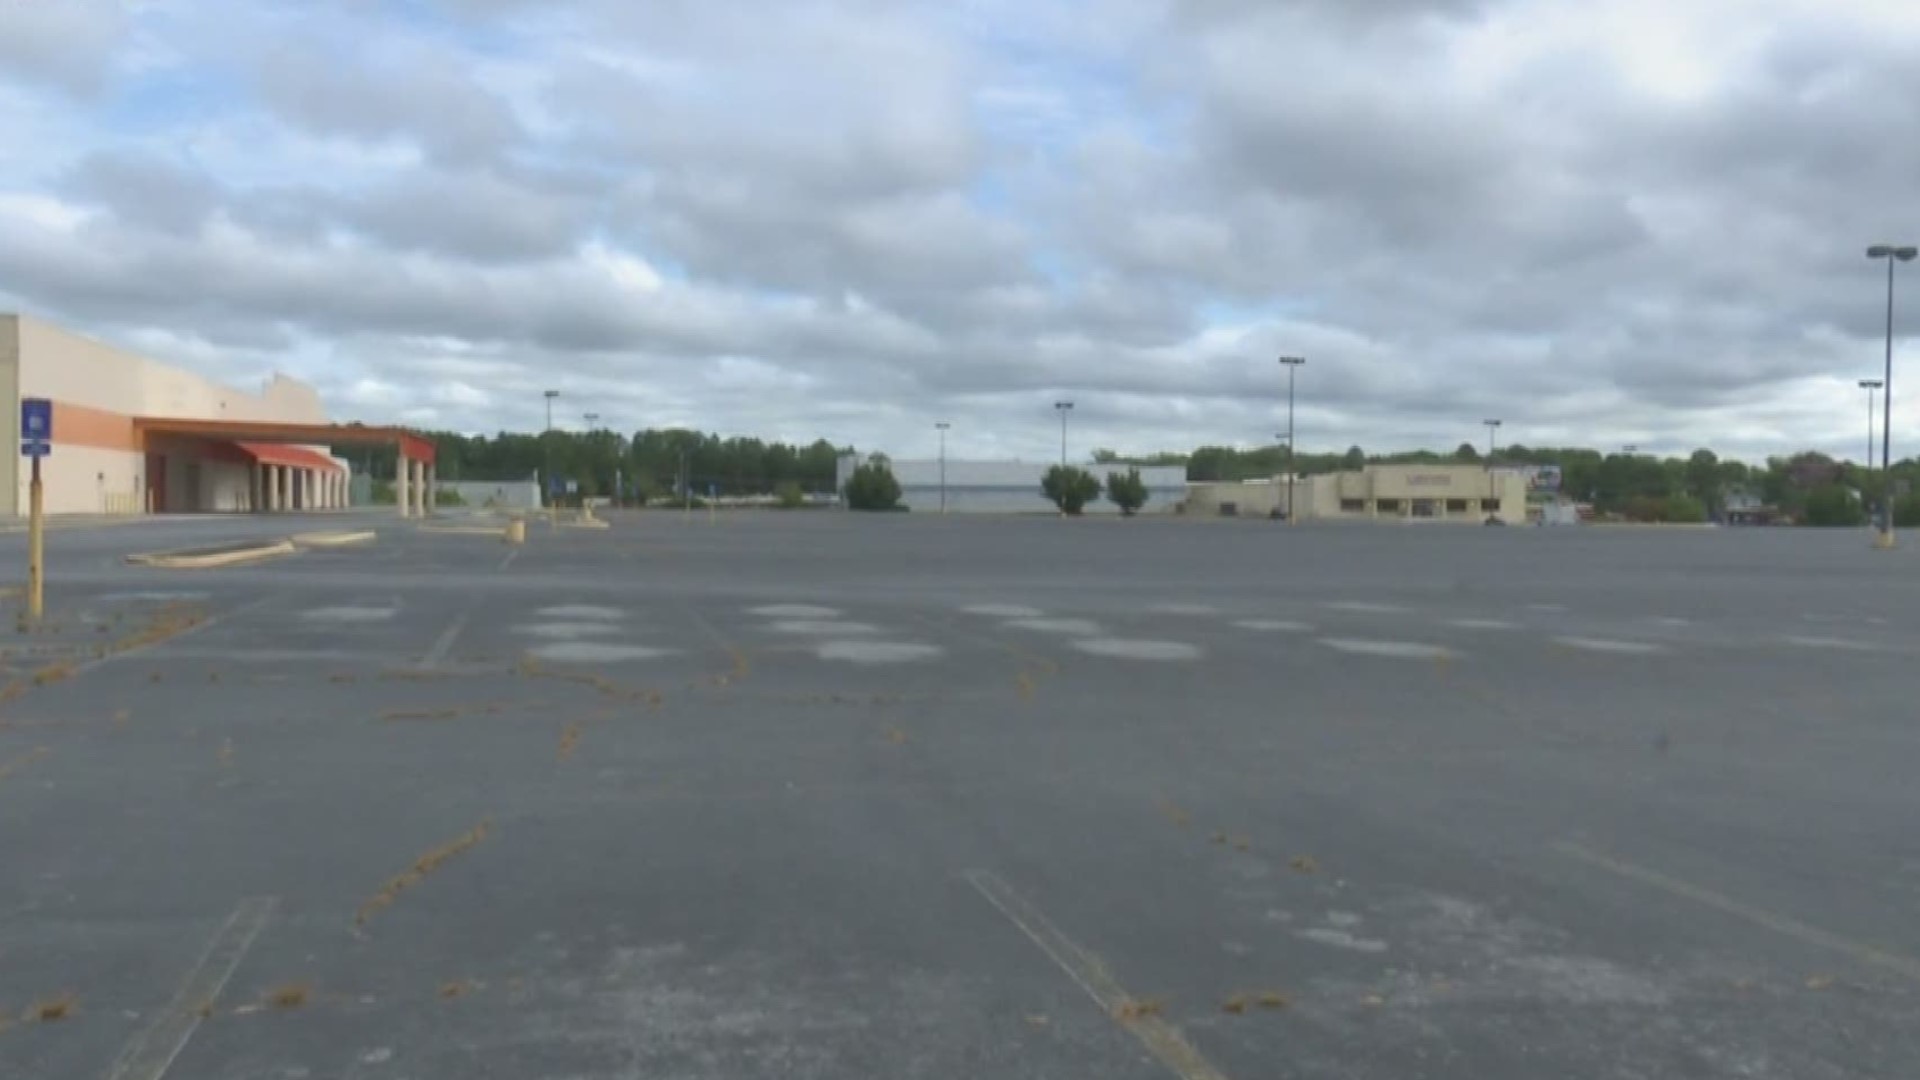 New York realty company Ultimate Realty hopes to rezone the Westgate Shopping Center off of Eisenhower Parkway and Pio Nono Avenue in Macon. They want to turn old stores into warehouses.